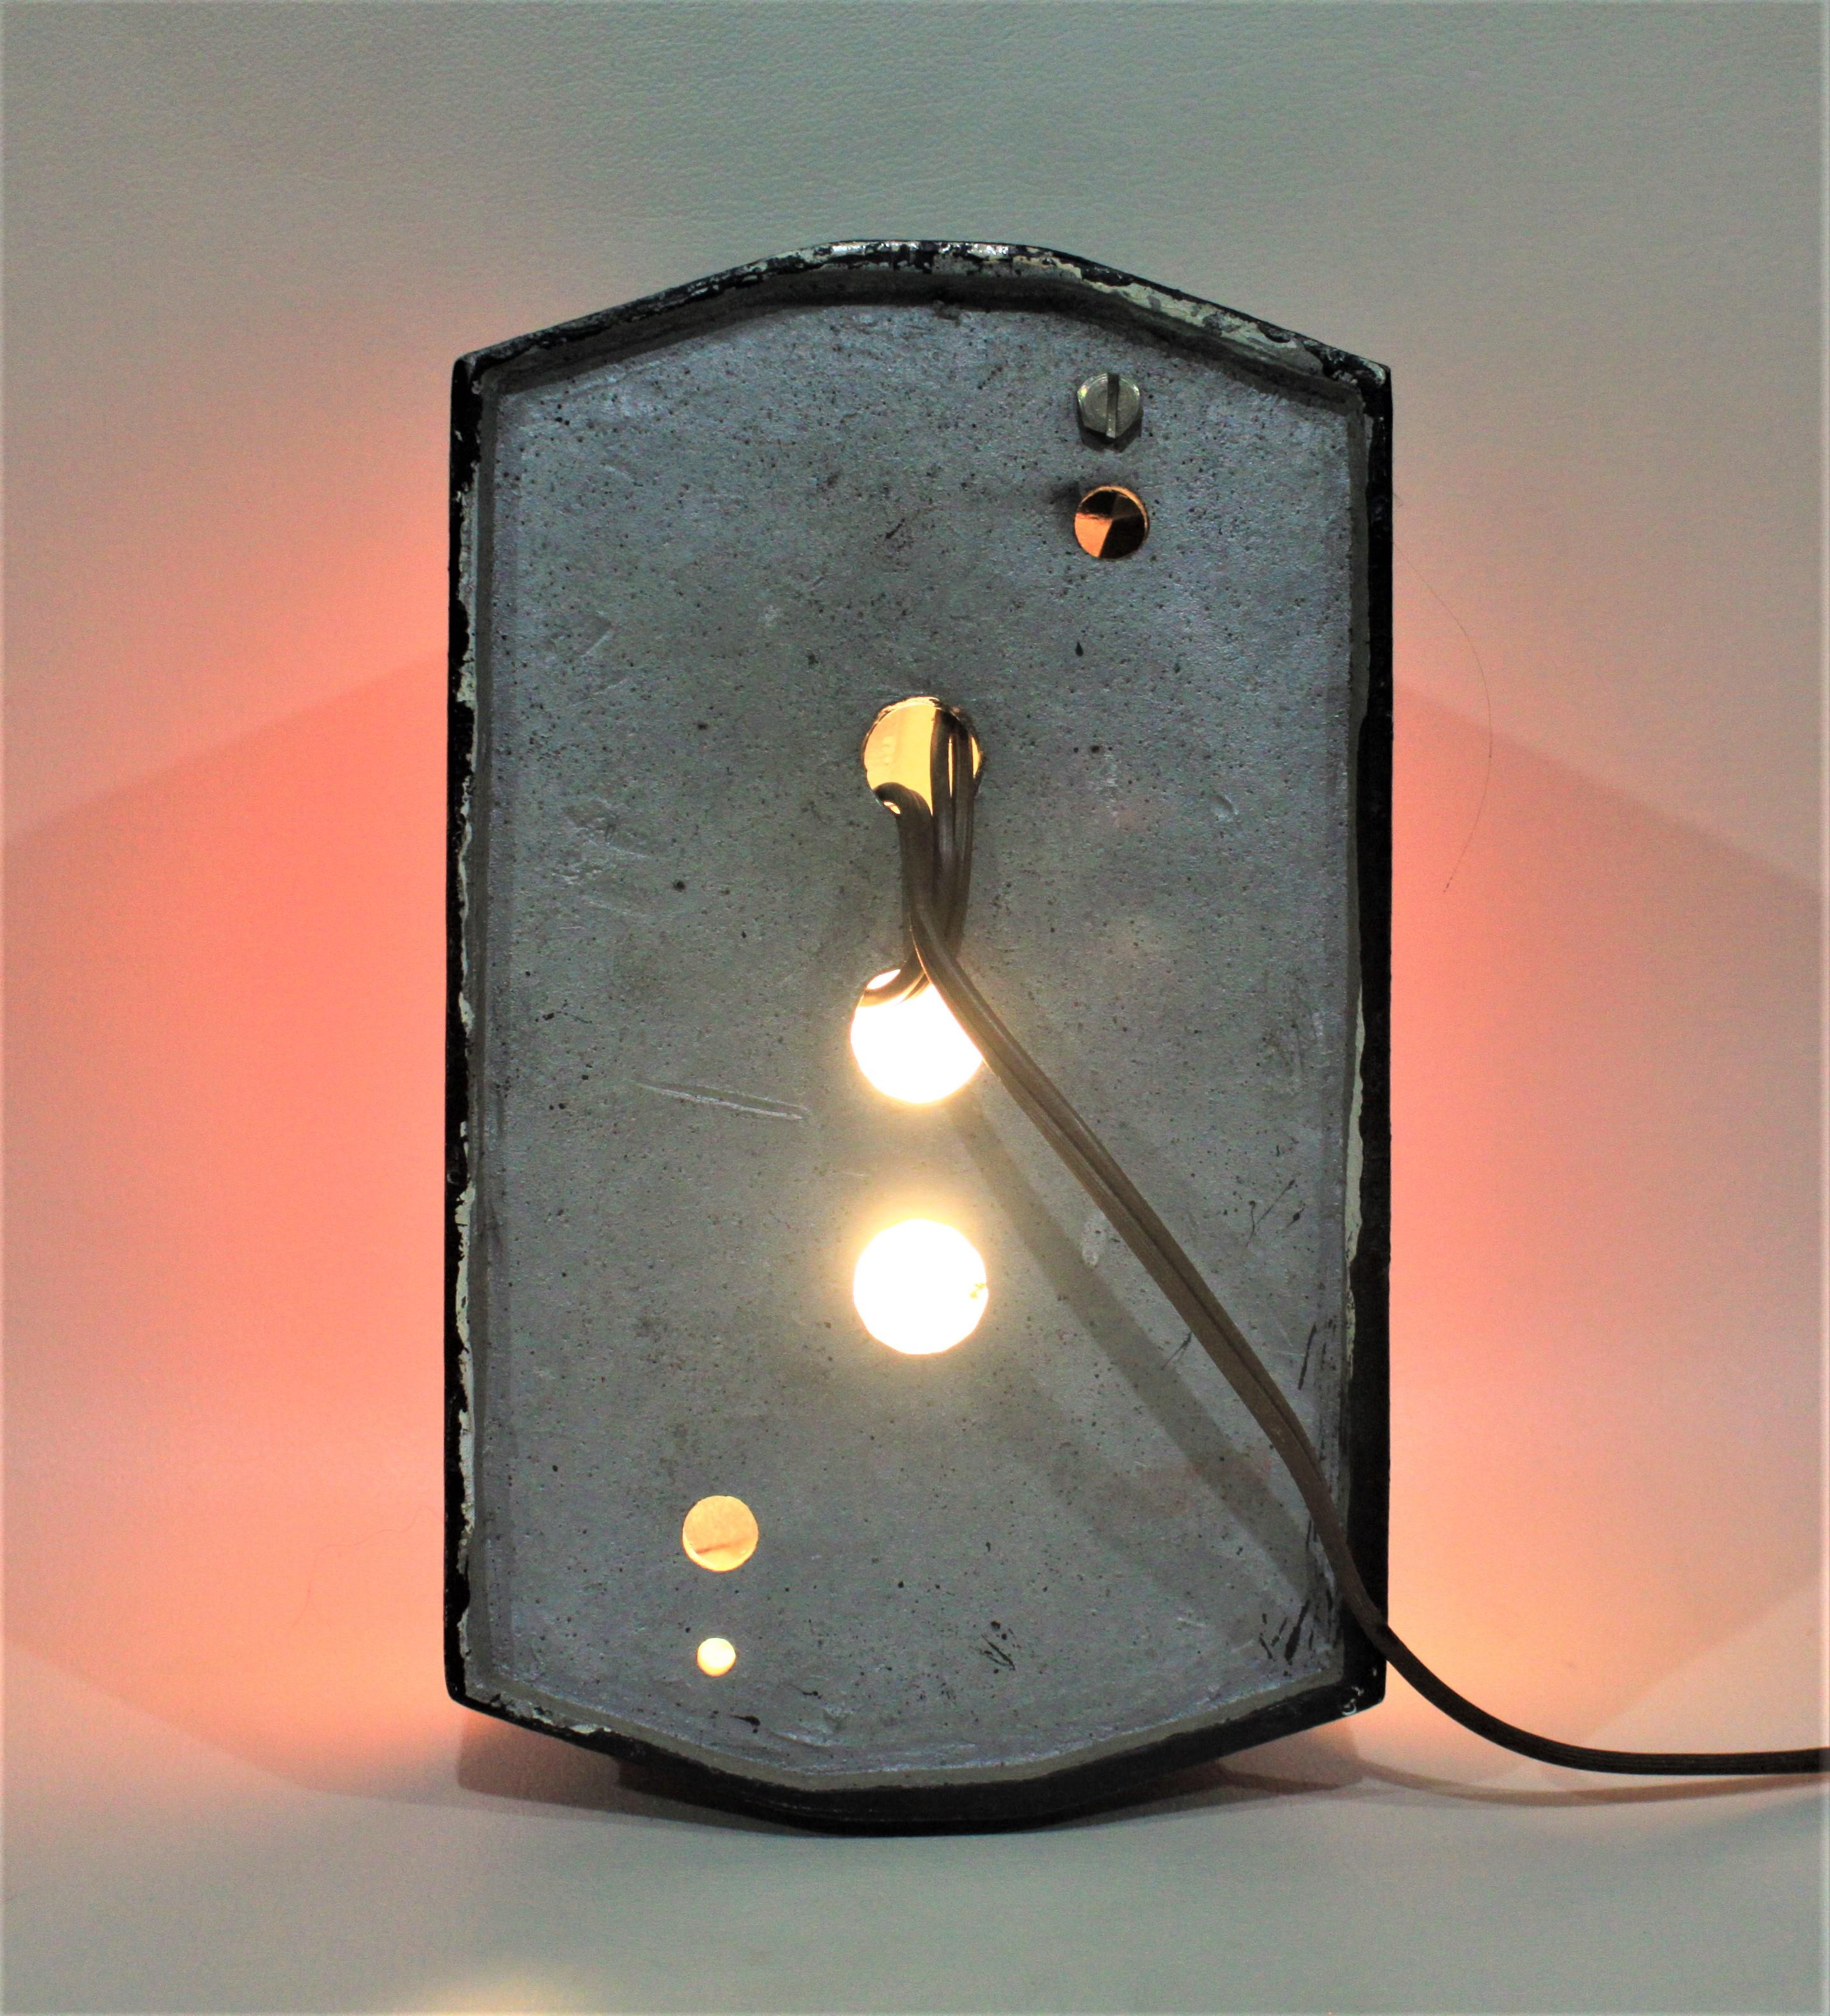 Mid-Century Modern Industrial Double Sided Exit Light or Sign In Good Condition For Sale In Hamilton, Ontario